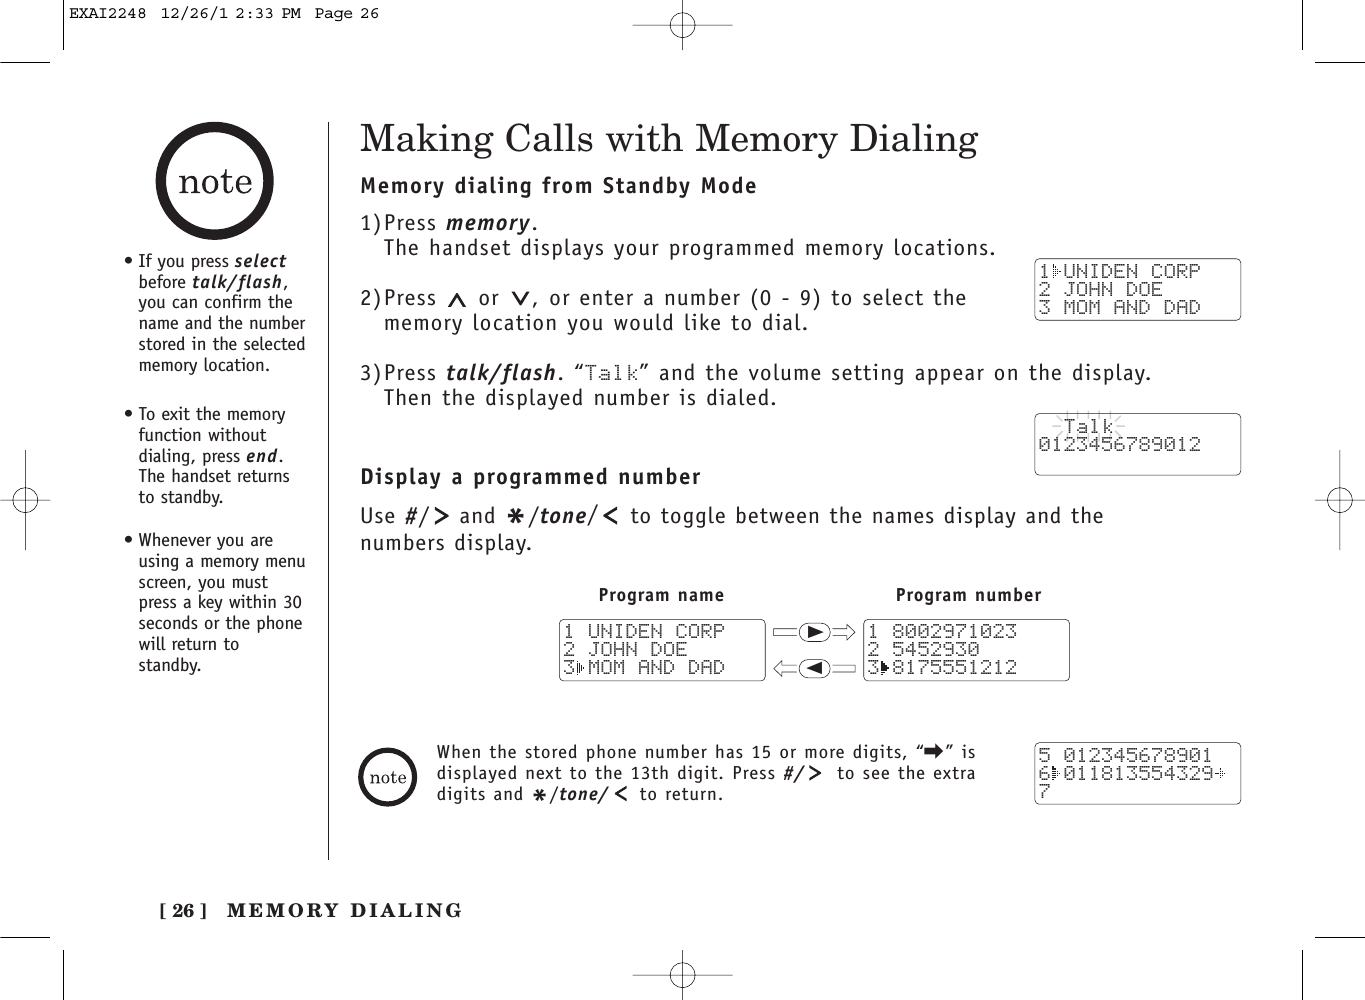 [ 26 ]Making Calls with Memory DialingMemory dialing from Standby Mode1)Press memory.The handset displays your programmed memory locations.2)Press  or  , or enter a number (0 - 9) to select thememory location you would like to dial.3)Press talk/flash. “Talk” and the volume setting appear on the display. Then the displayed number is dialed.Display a programmed numberUse #/and */tone/to toggle between the names display and the numbers display.1 UNIDEN CORP2 JOHN DOE3 MOM AND DAD  Talk0123456789012Program name Program number111 80029710232 54529303 81755512121 UNIDEN CORP2 JOHN DOE3 MOM AND DAD5 0123456789016 0118135543297When the stored phone number has 15 or more digits, “\” isdisplayed next to the 13th digit. Press #/ to see the extradigits and */tone/ to return.•If you press selectbefore talk/flash,you can confirm thename and the numberstored in the selectedmemory location.•To exit the memoryfunction withoutdialing, press end.The handset returnsto standby.•Whenever you areusing a memory menuscreen, you mustpress a key within 30seconds or the phonewill return tostandby.MEMORY DIALINGEXAI2248  12/26/1 2:33 PM  Page 26